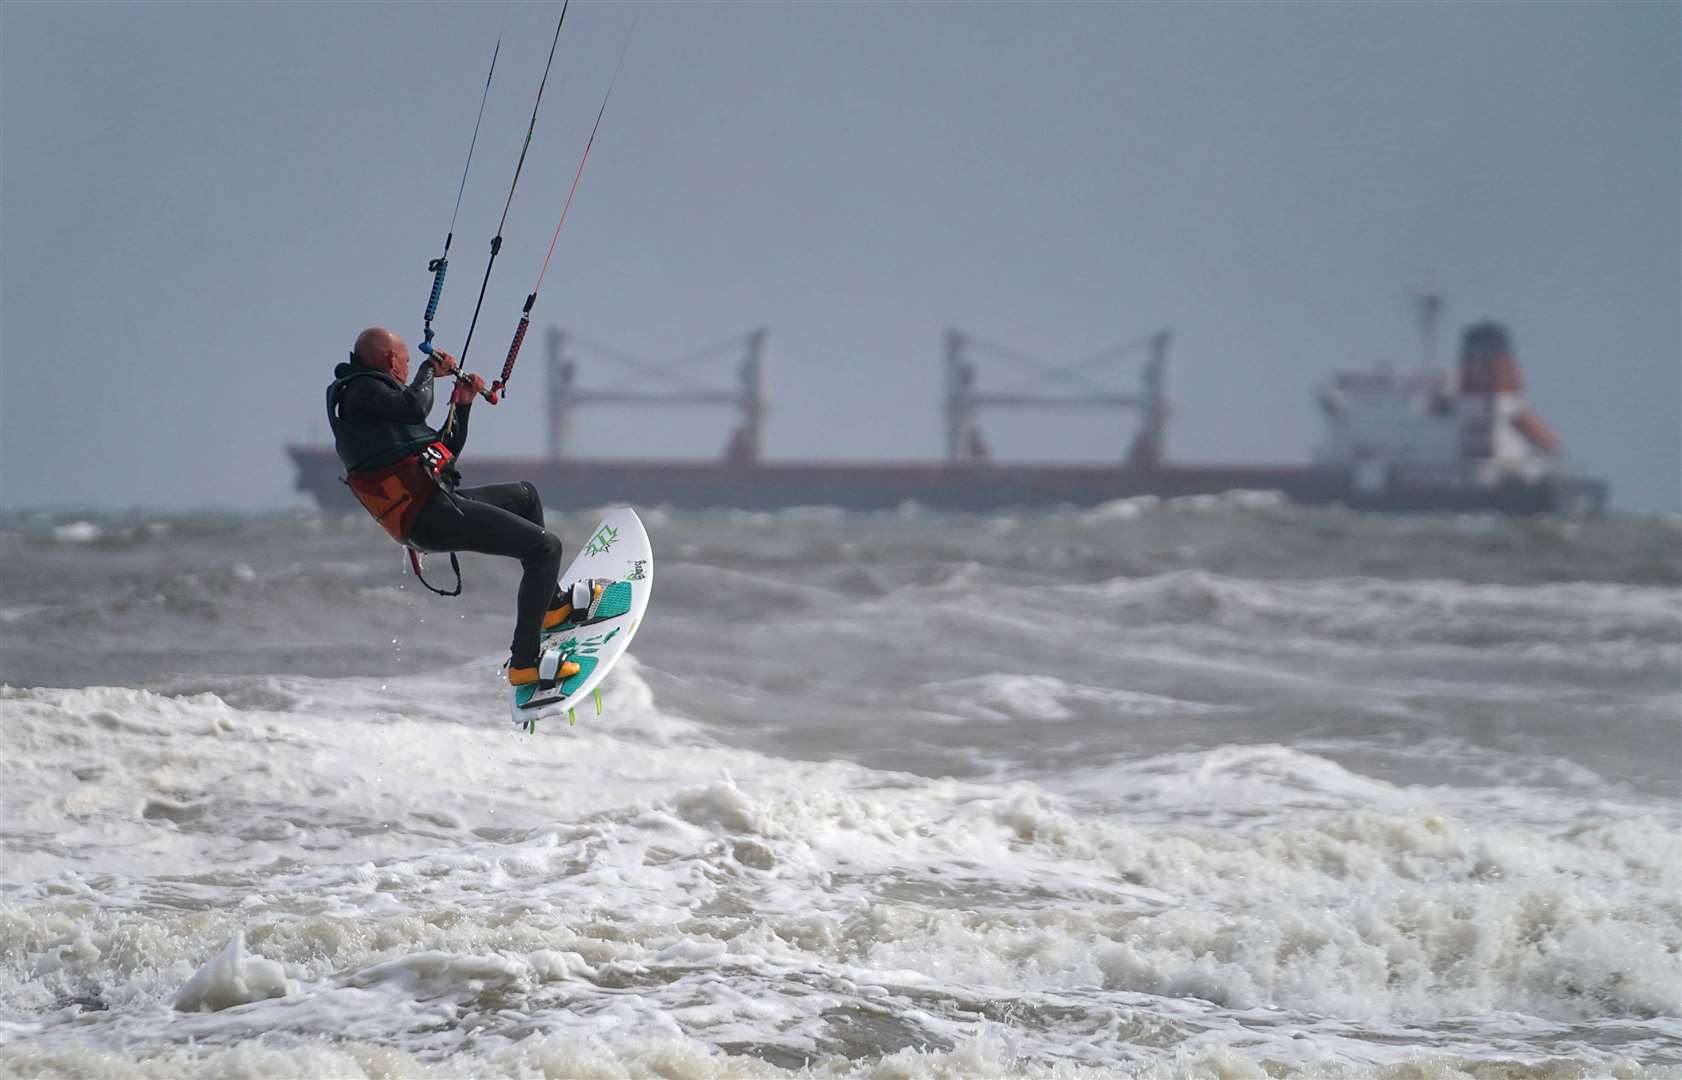 Kite surfers off Tynemouth beach in north-east England (Owen Humphreys/PA)